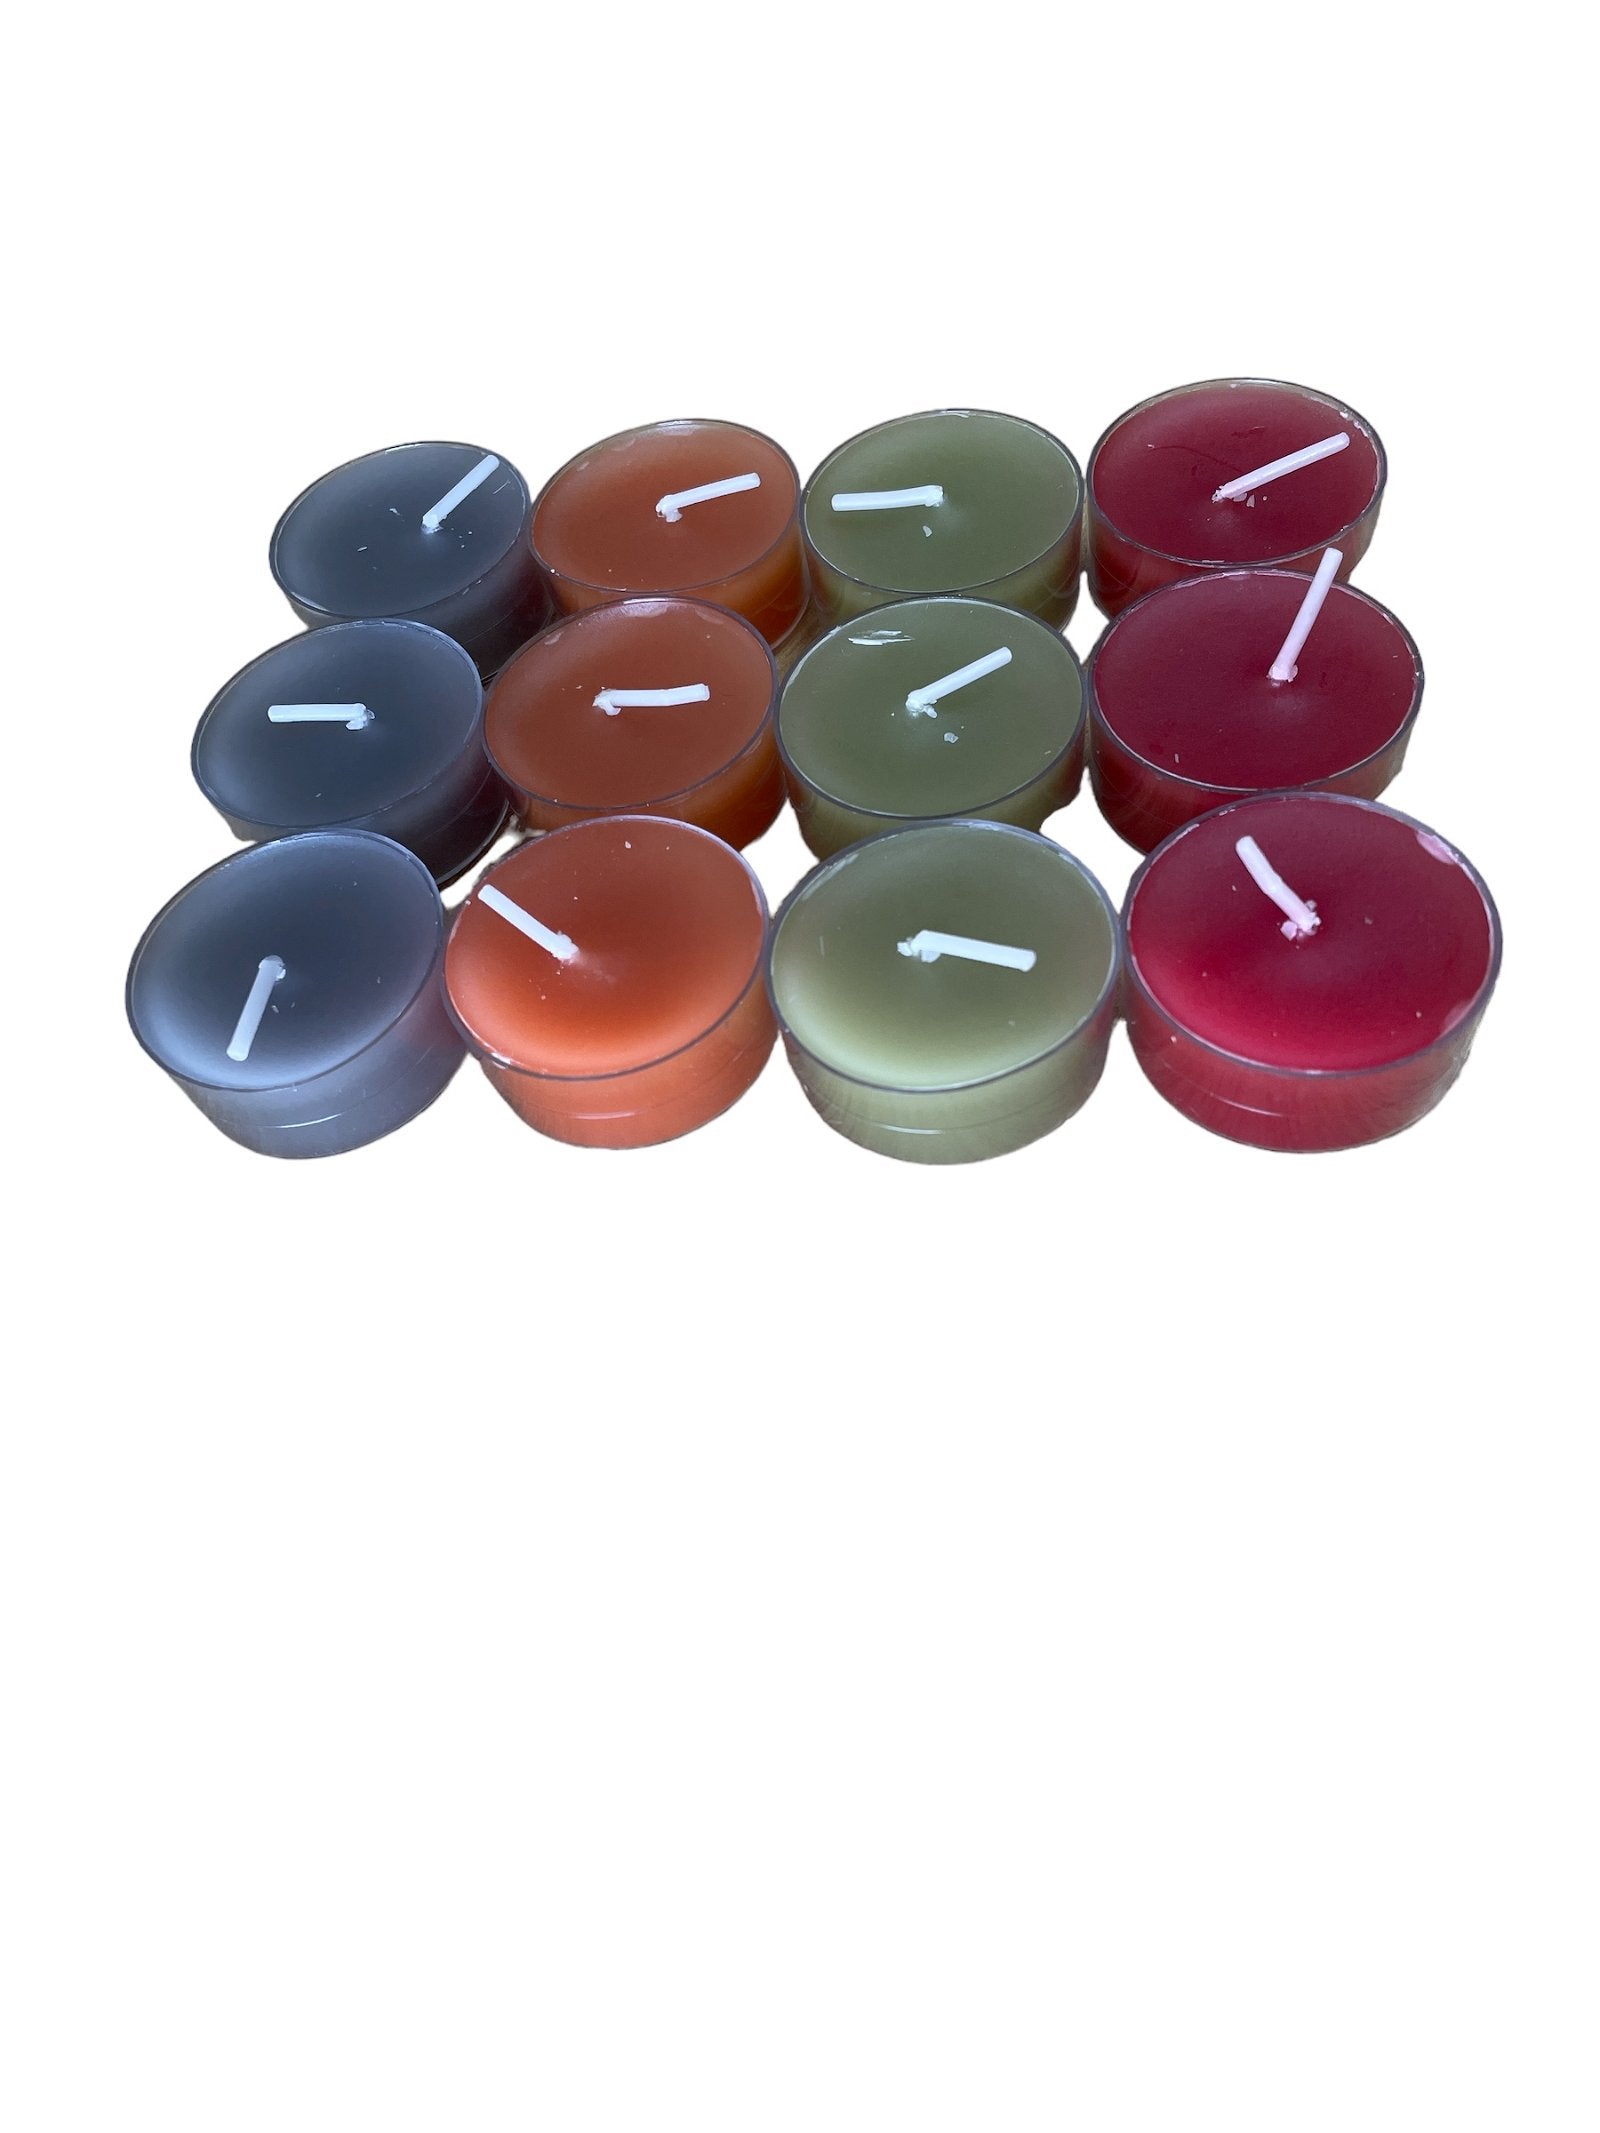 View Multi Coloured Patterned Scented Tea Light Candles Pack of 12 information